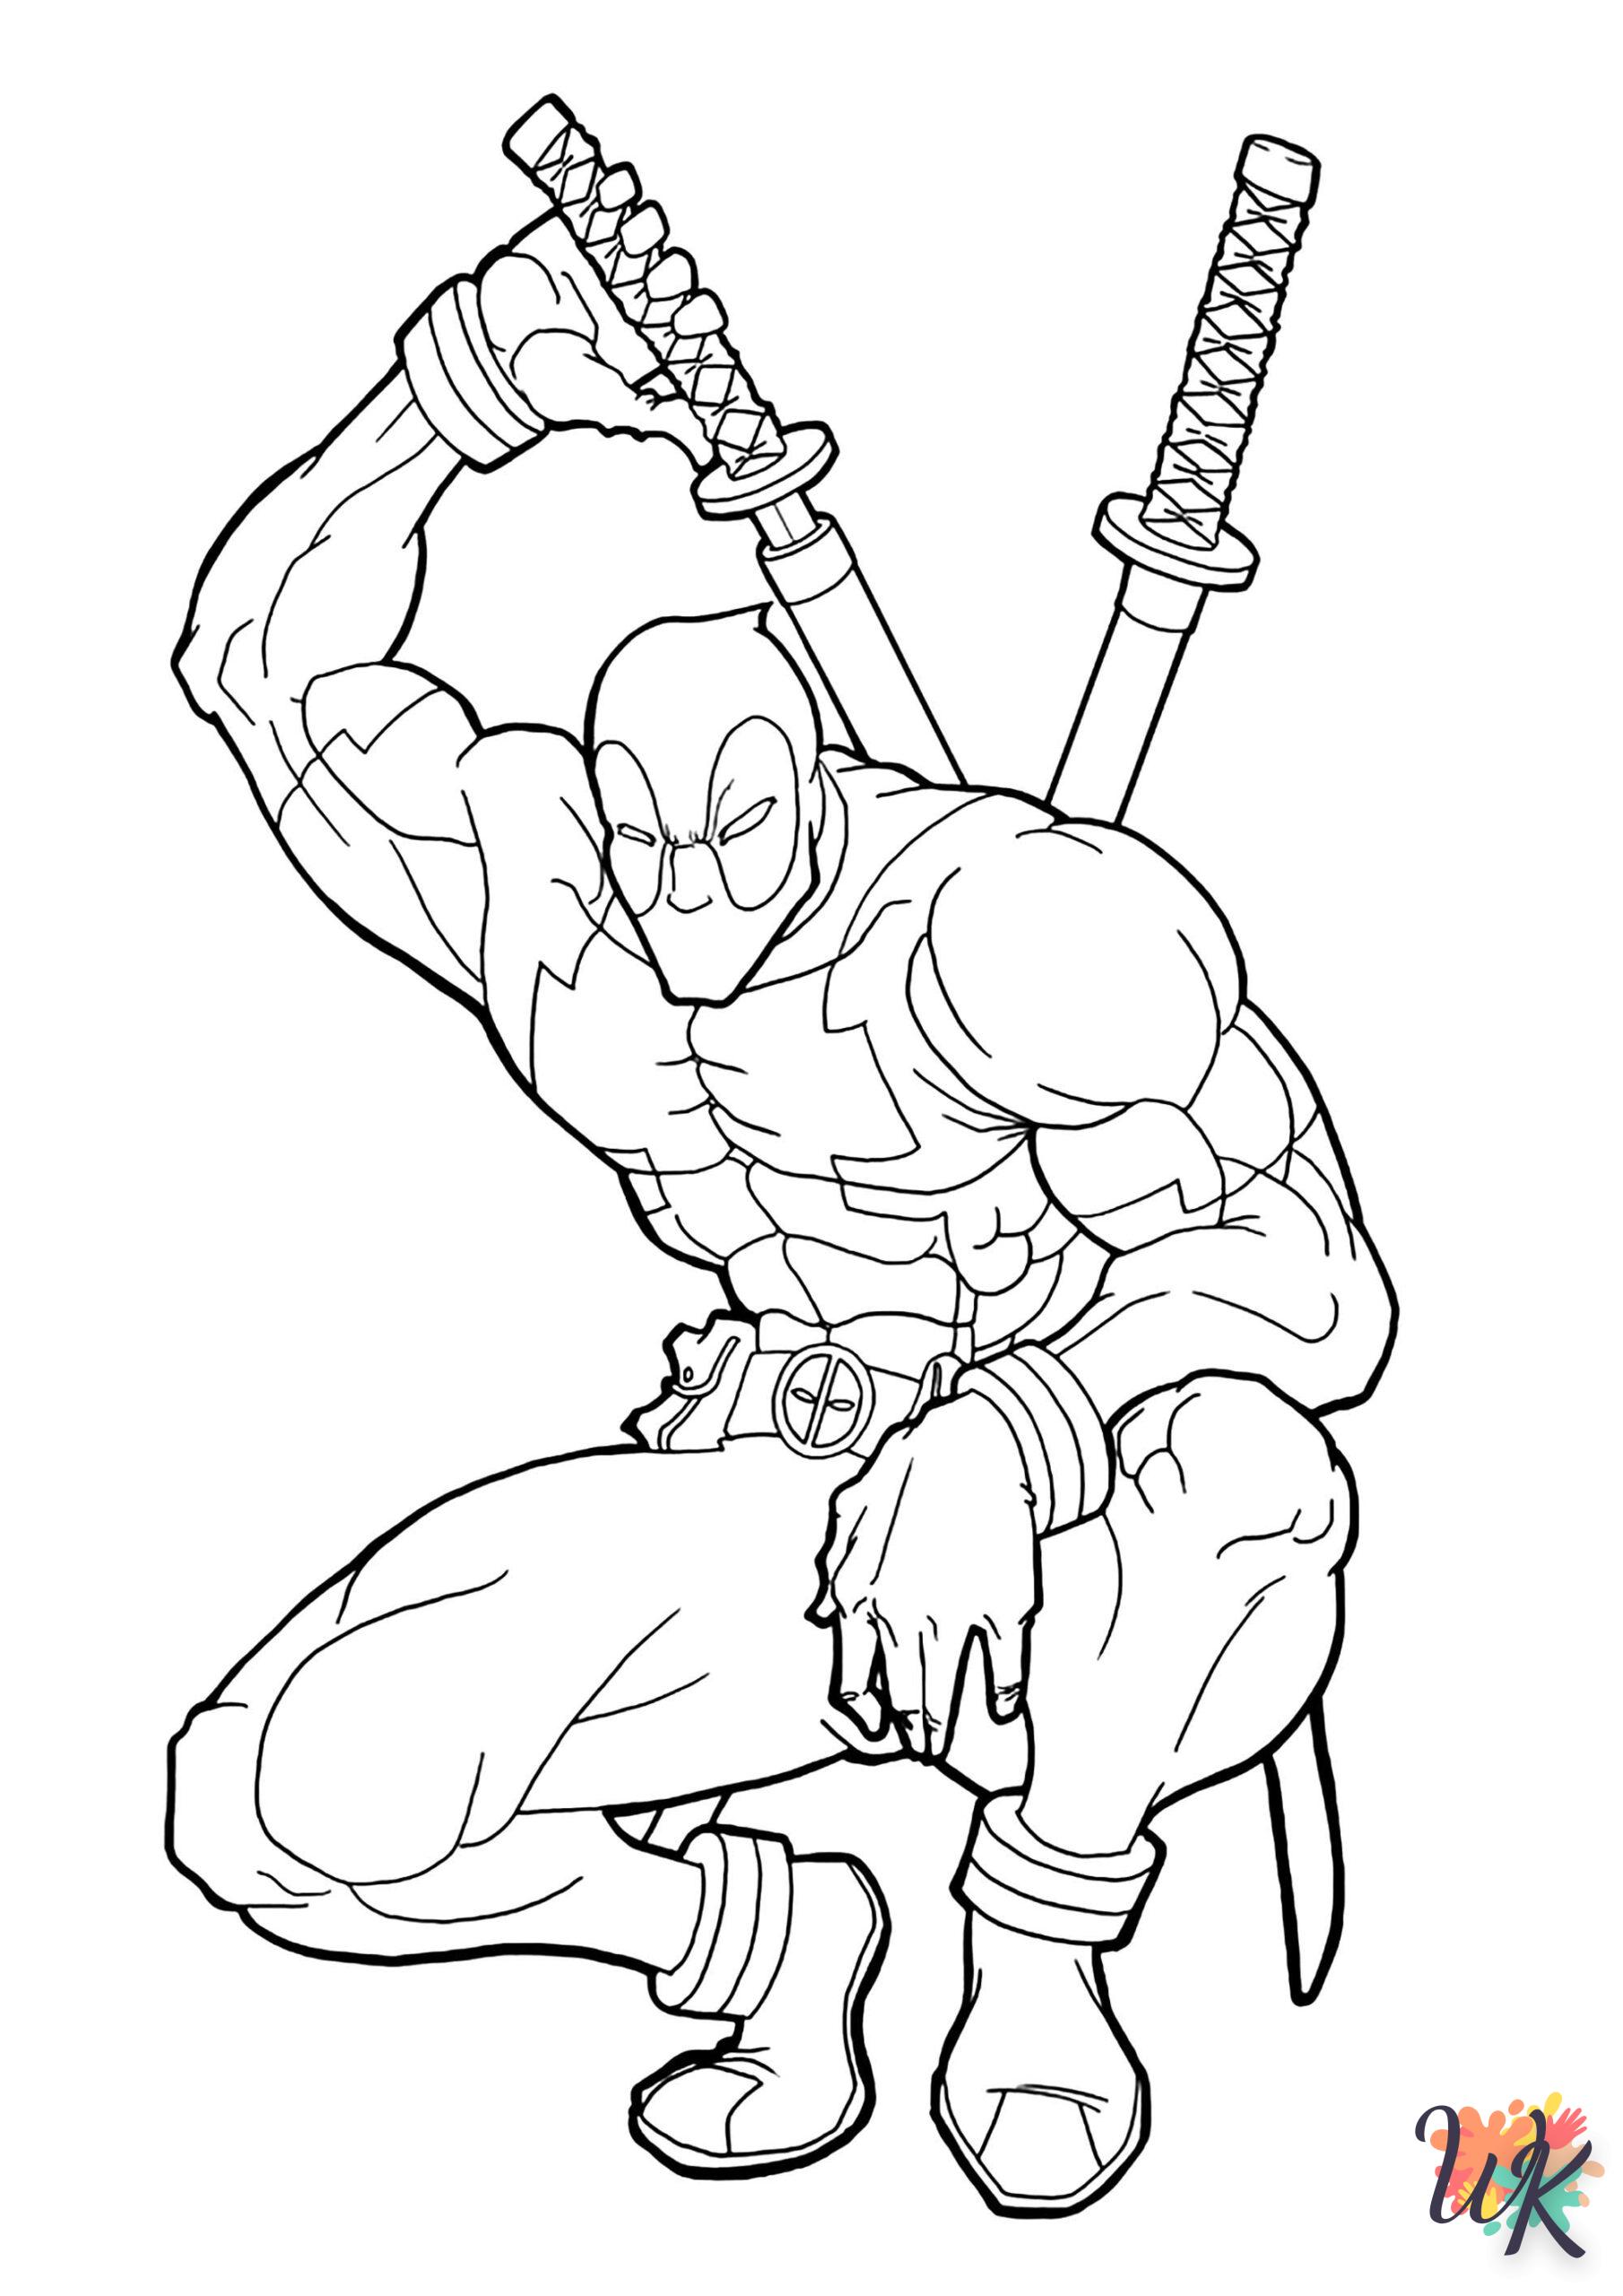 coloring pages Deadpool